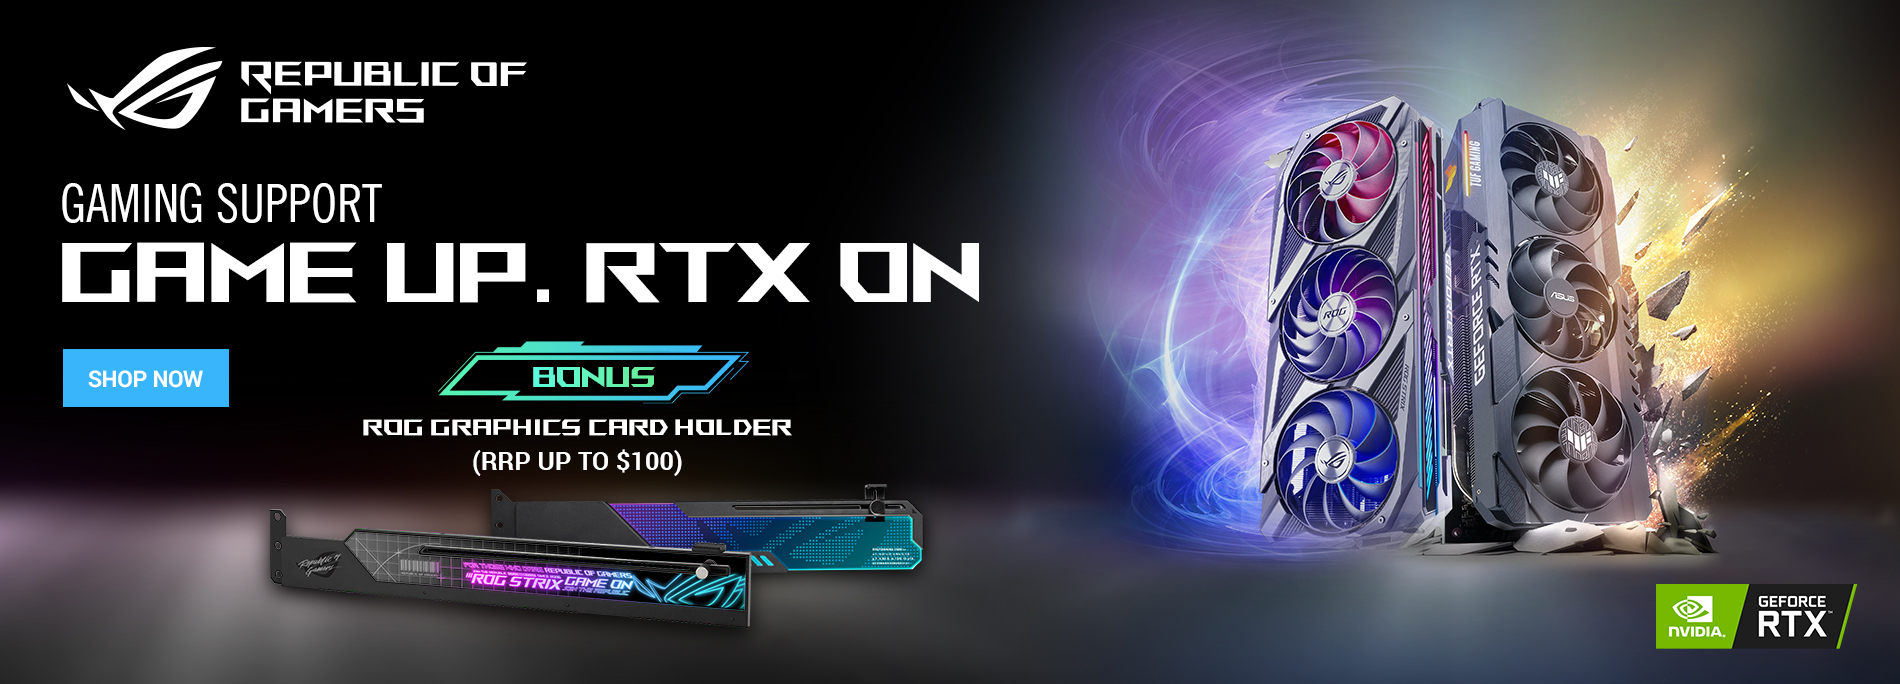 Receive bonus Rog Strix Wingwall or Rog Strix graphics card holder with selected RTX30 series graphi